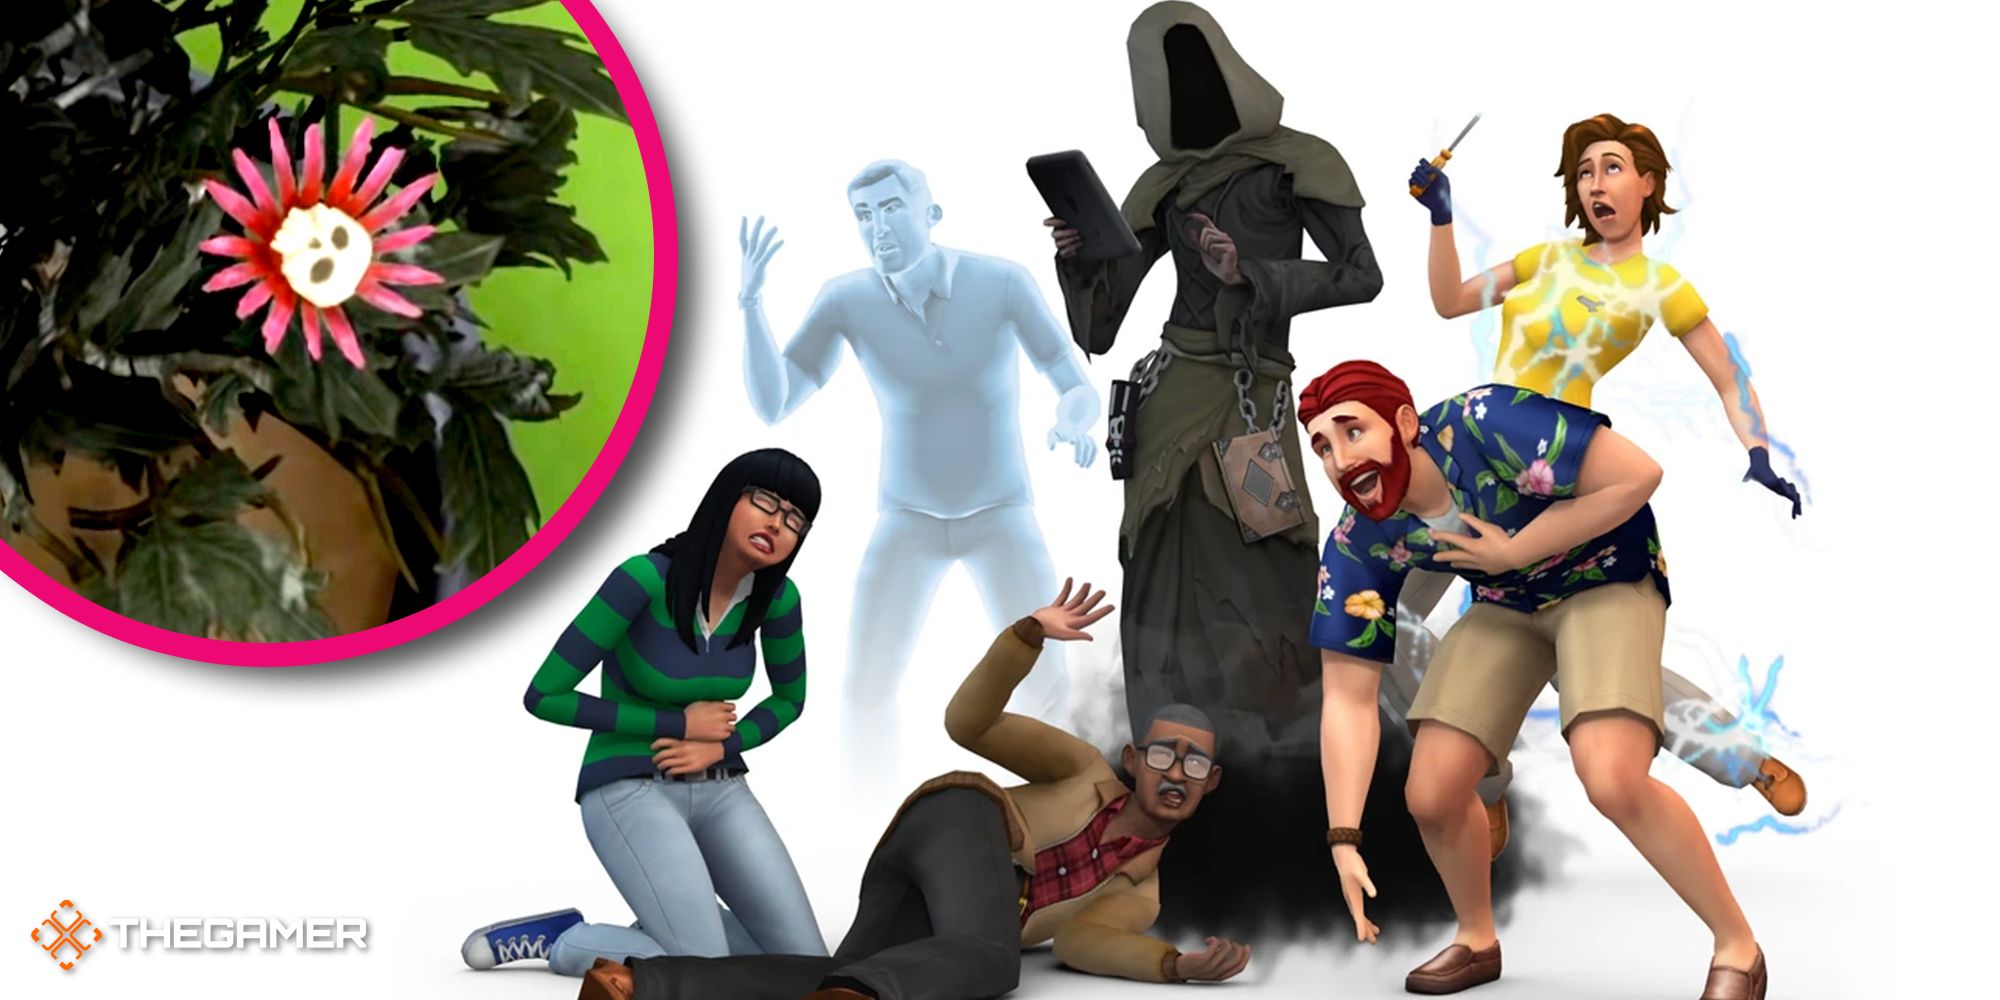 How To Get The Death Flower (Cheat) - The Sims 4 